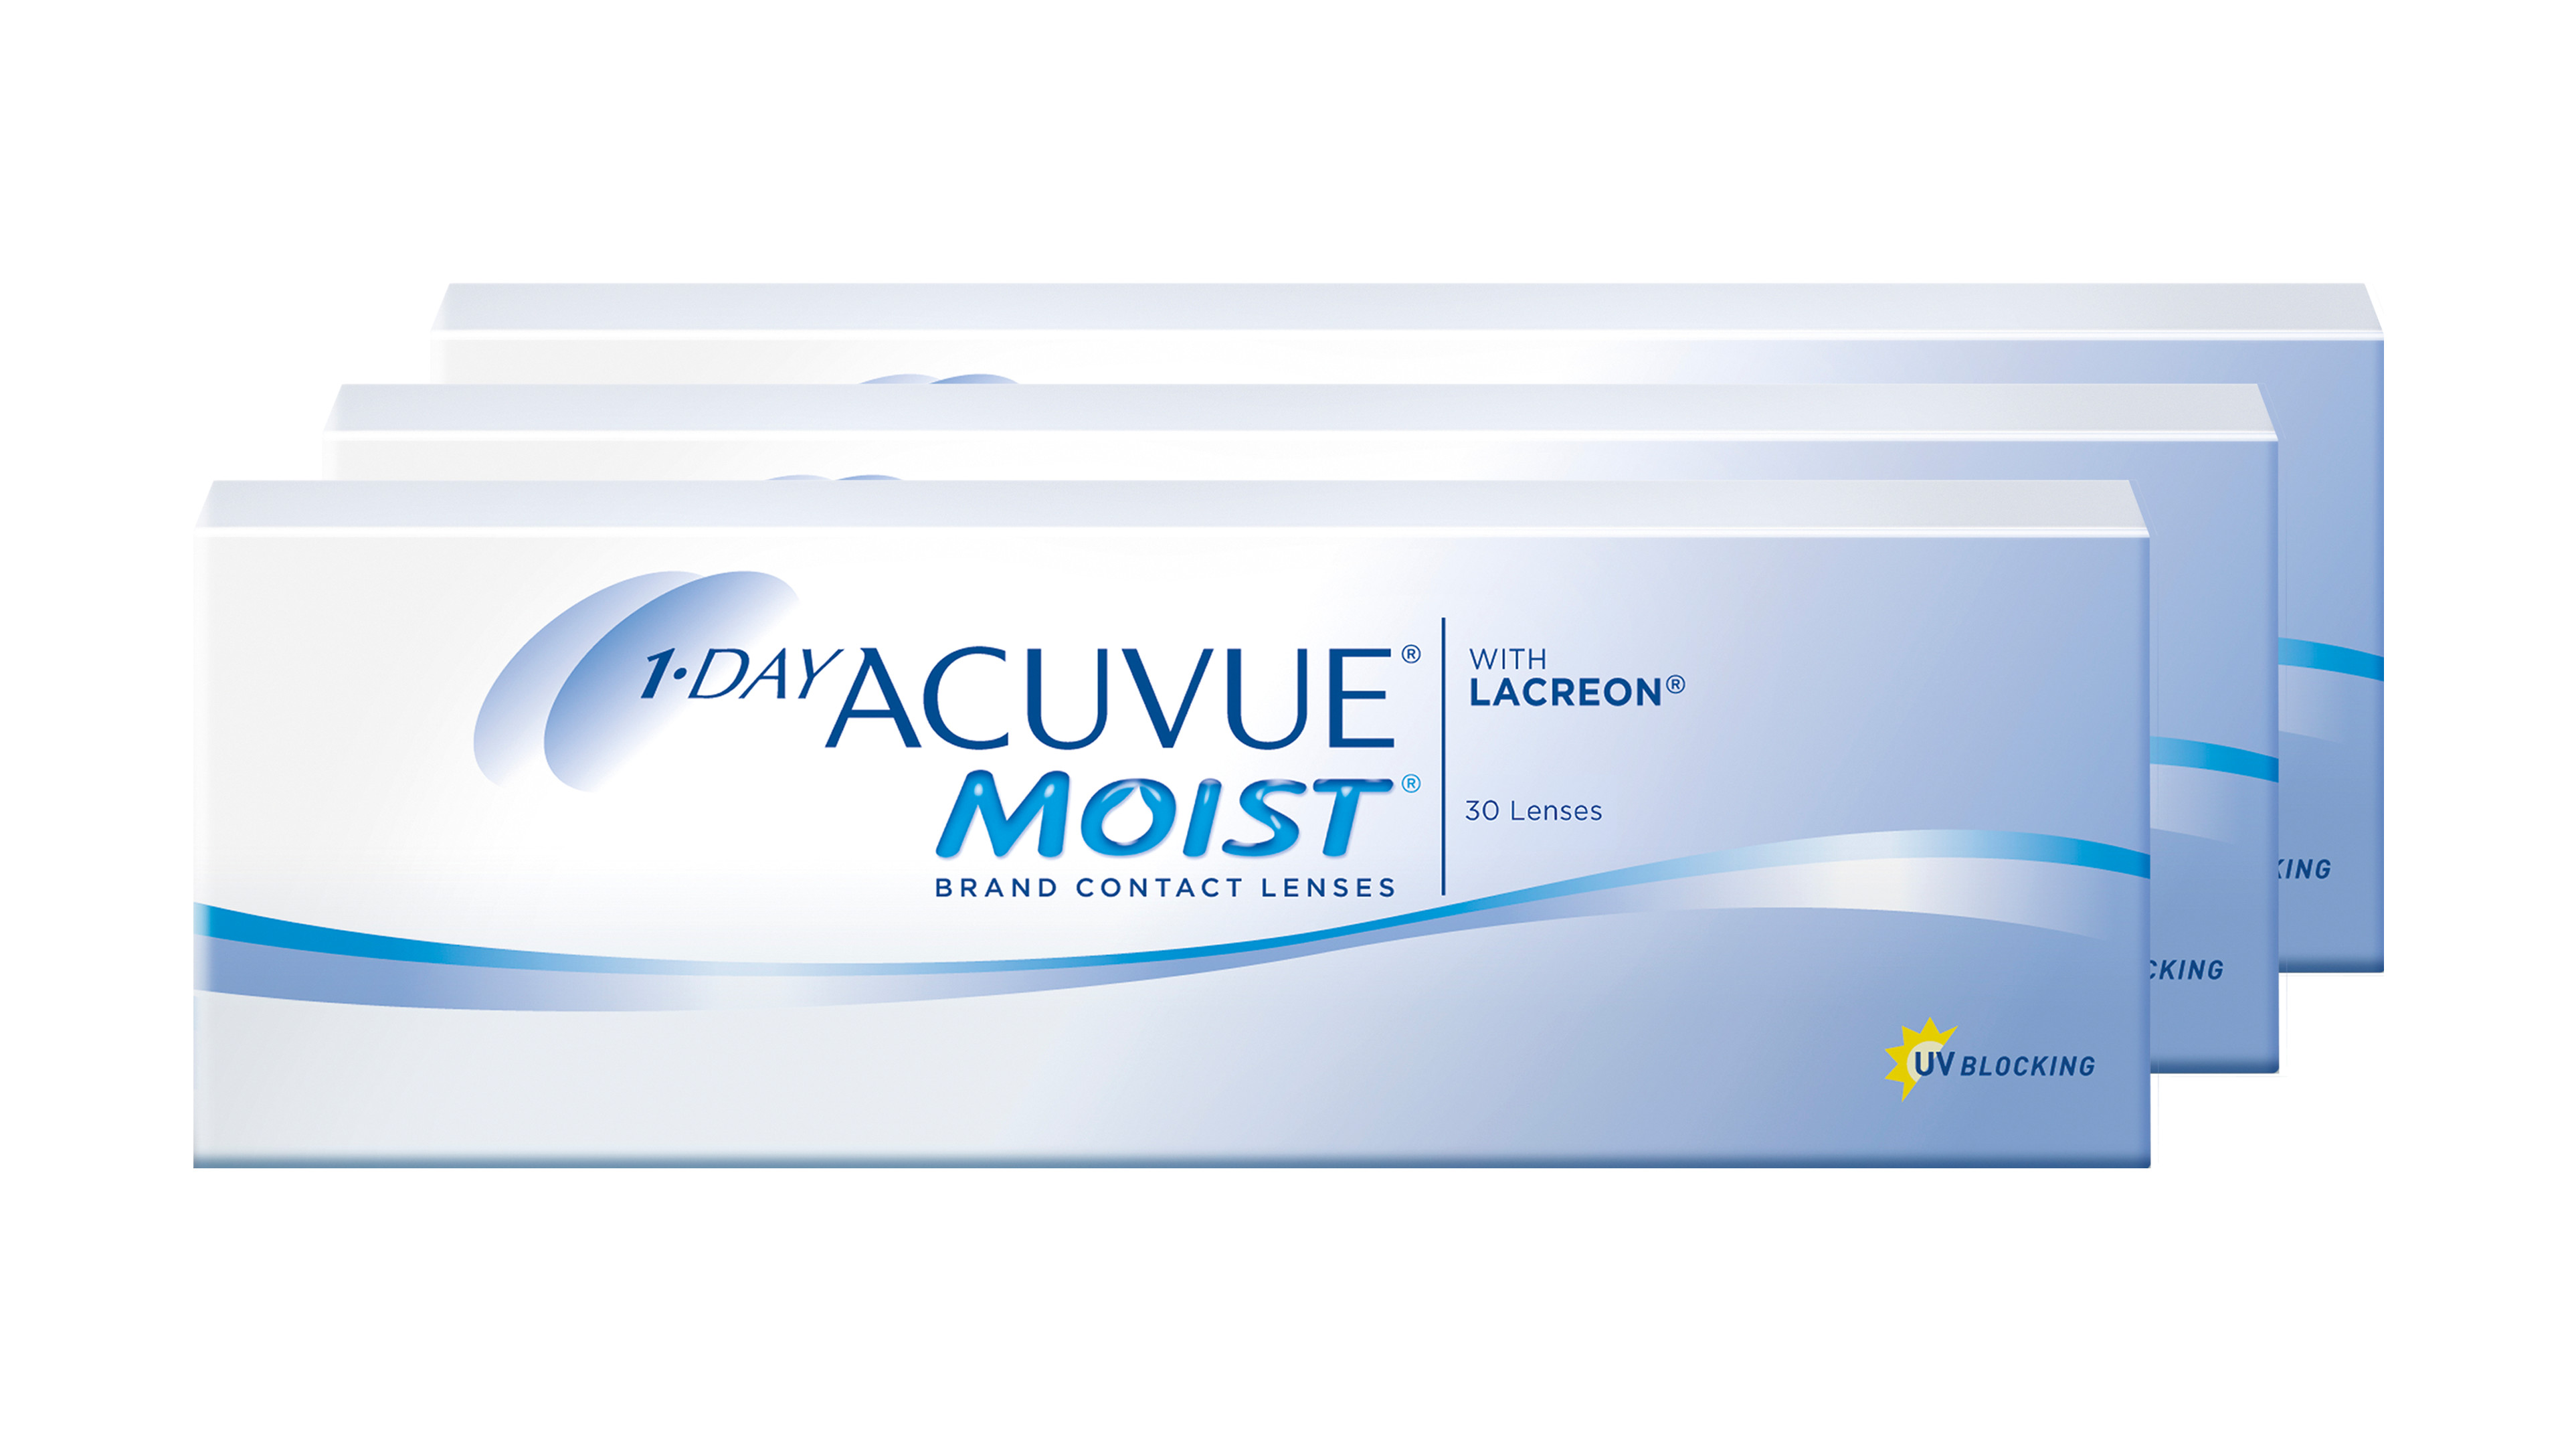 Front ACUVUE® 1-DAY ACUVUE® MOIST Tageslinsen Tageslinsen 90 Linsen pro Packung, pro Auge